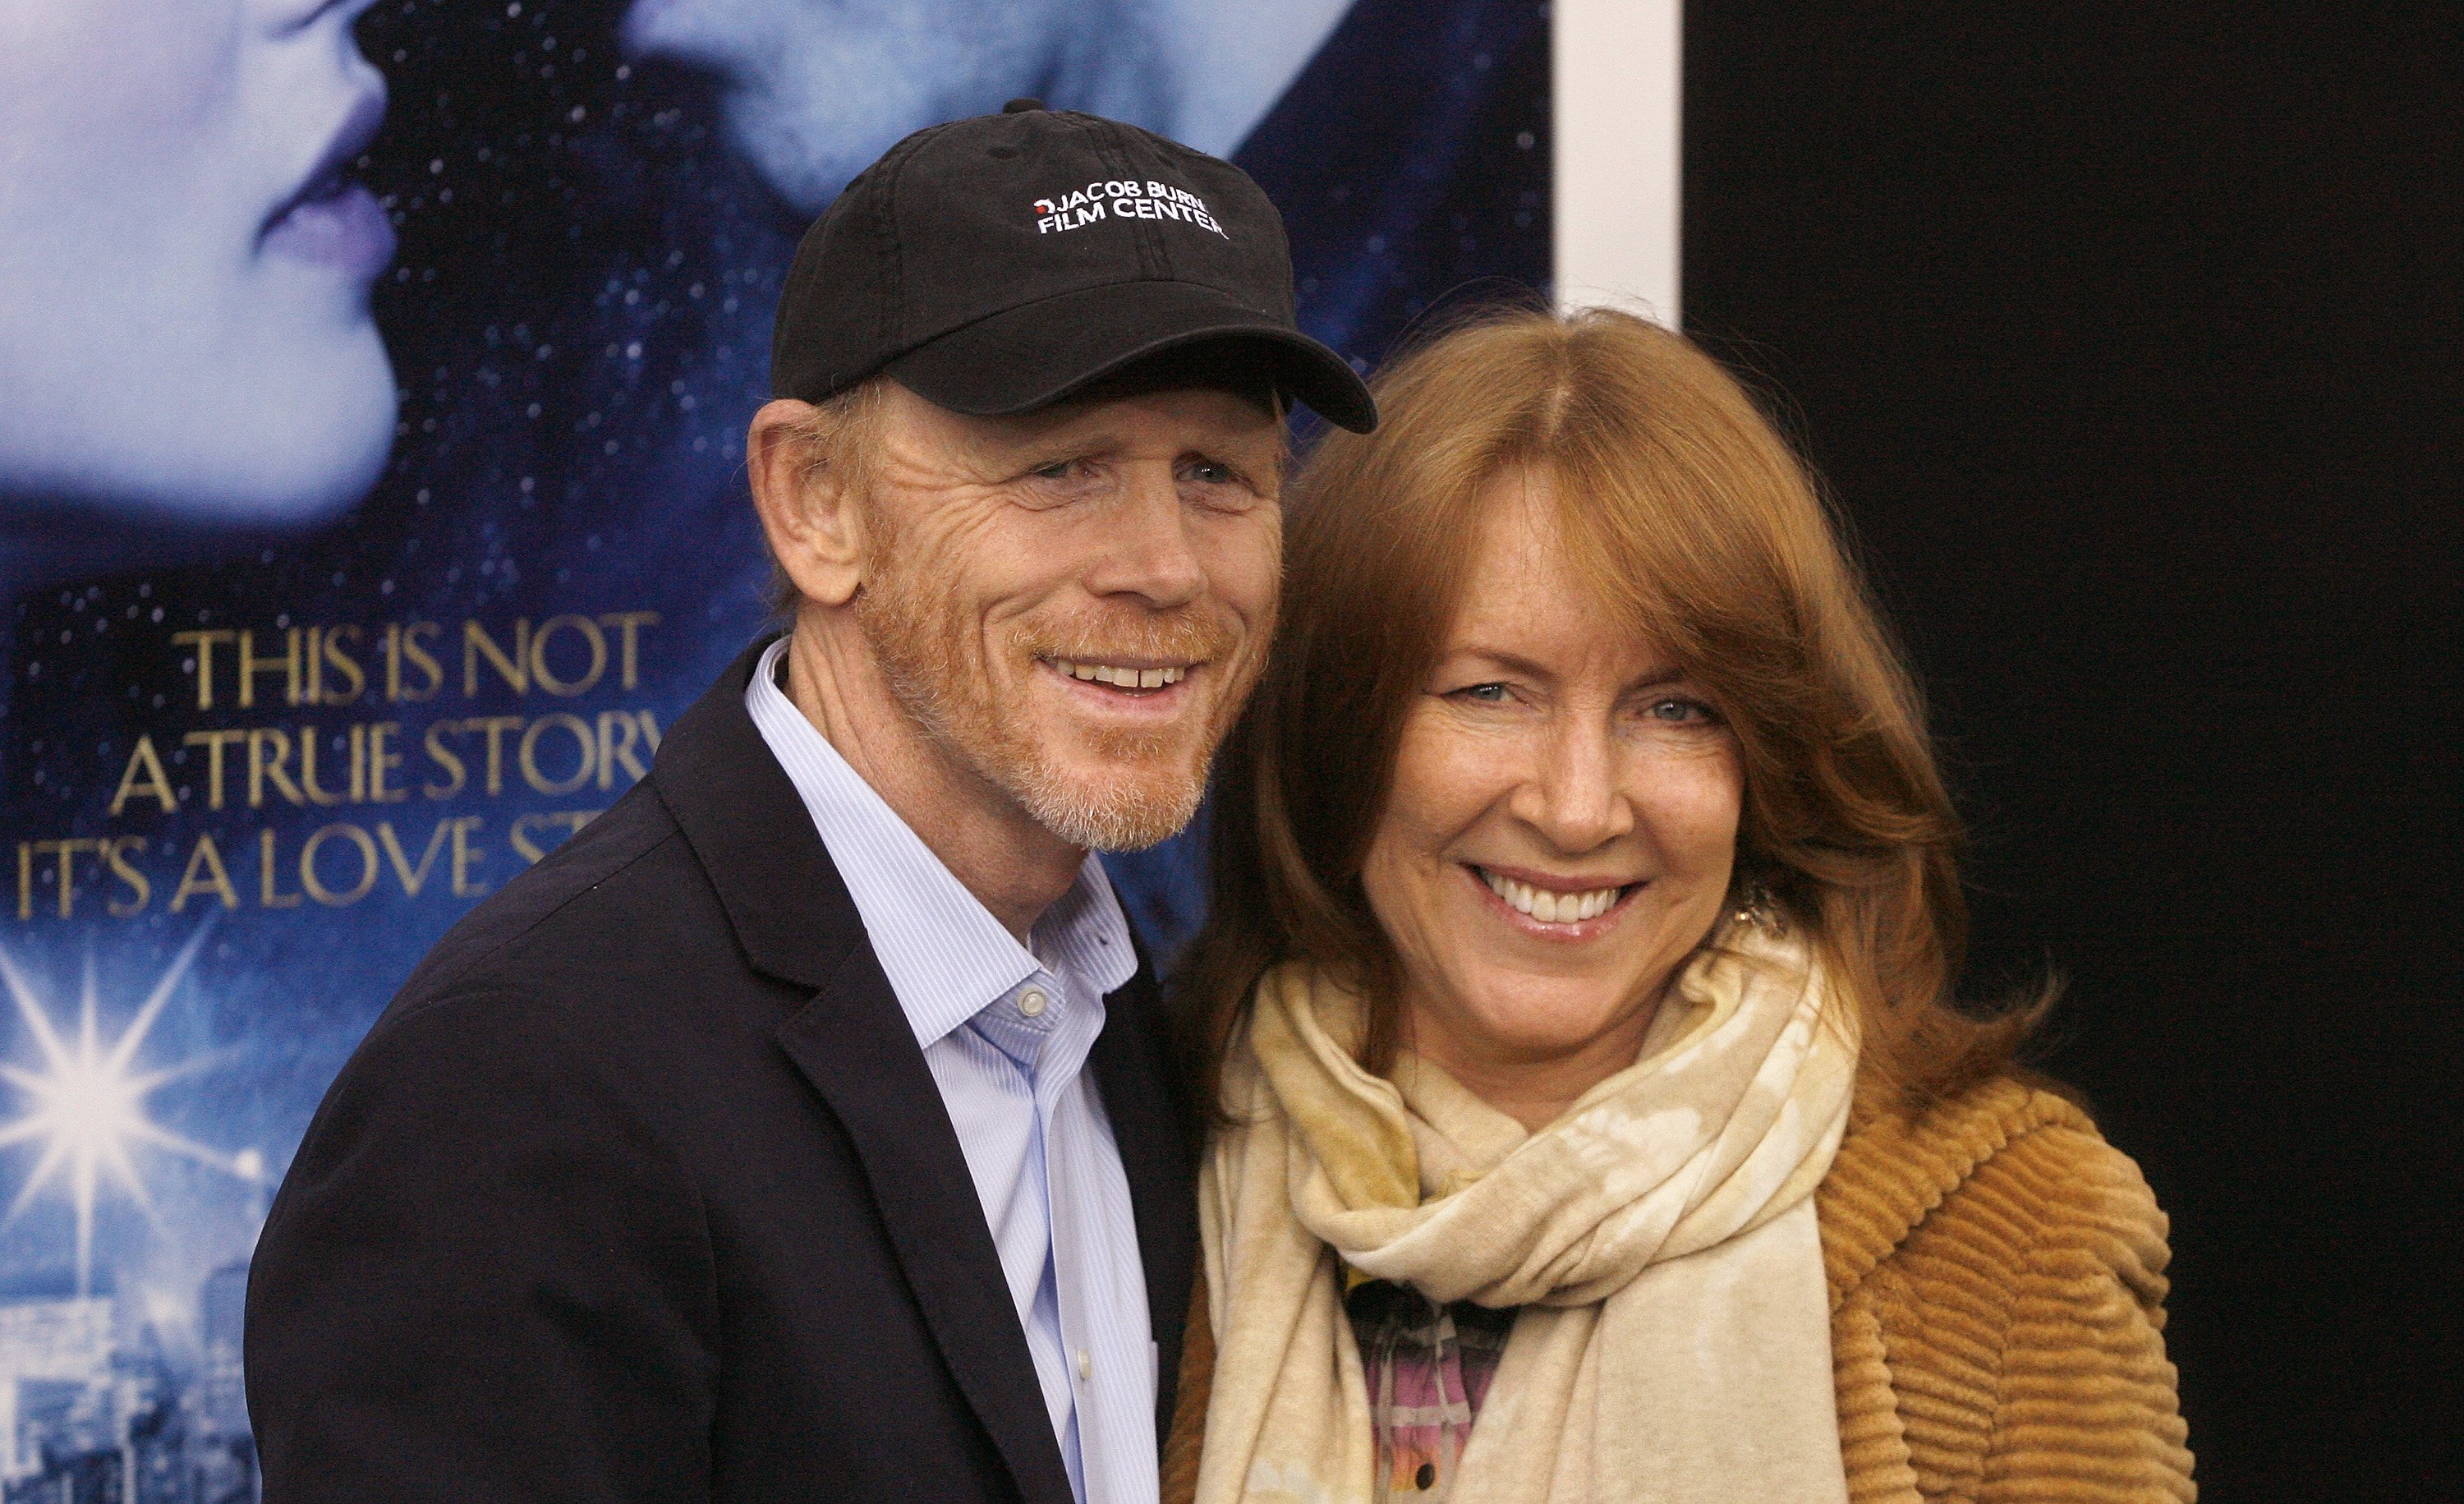 Ron Howard and his wife Cheryl Howard in New York 2014. | Source: Getty Images 